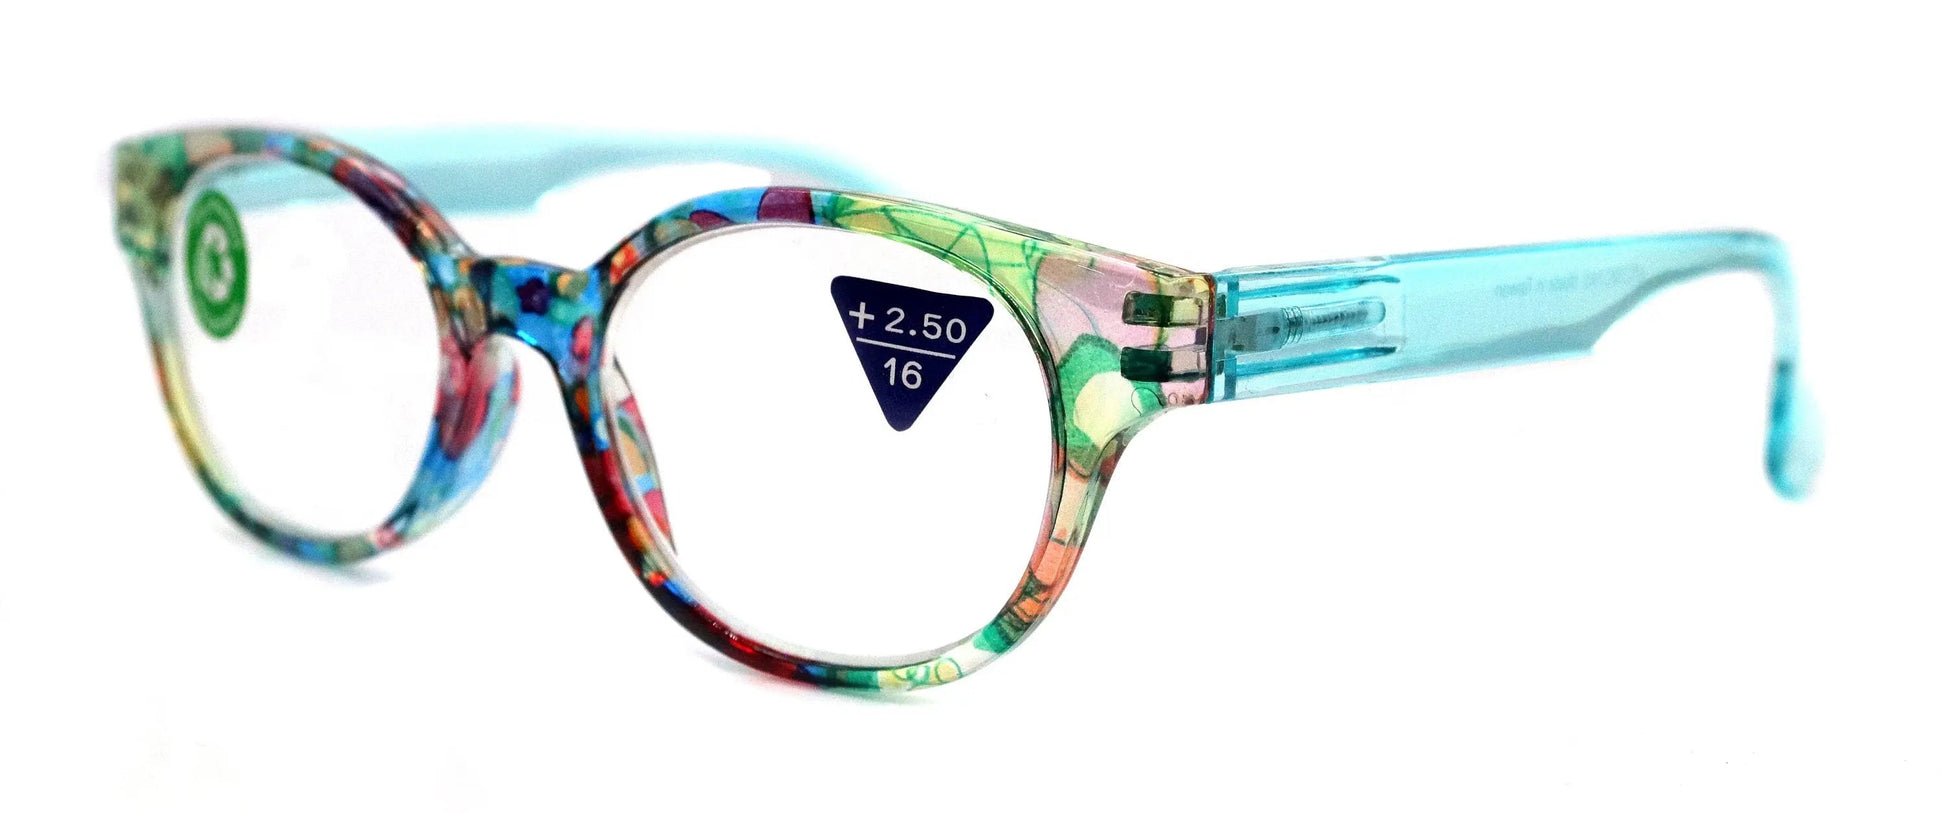 Versailles, (Premium) Reading Glasses High End Readers +1.25 .. +3.00 (Light Blue, Orange Floral) Round Optical Frames. NY Fifth Avenue.